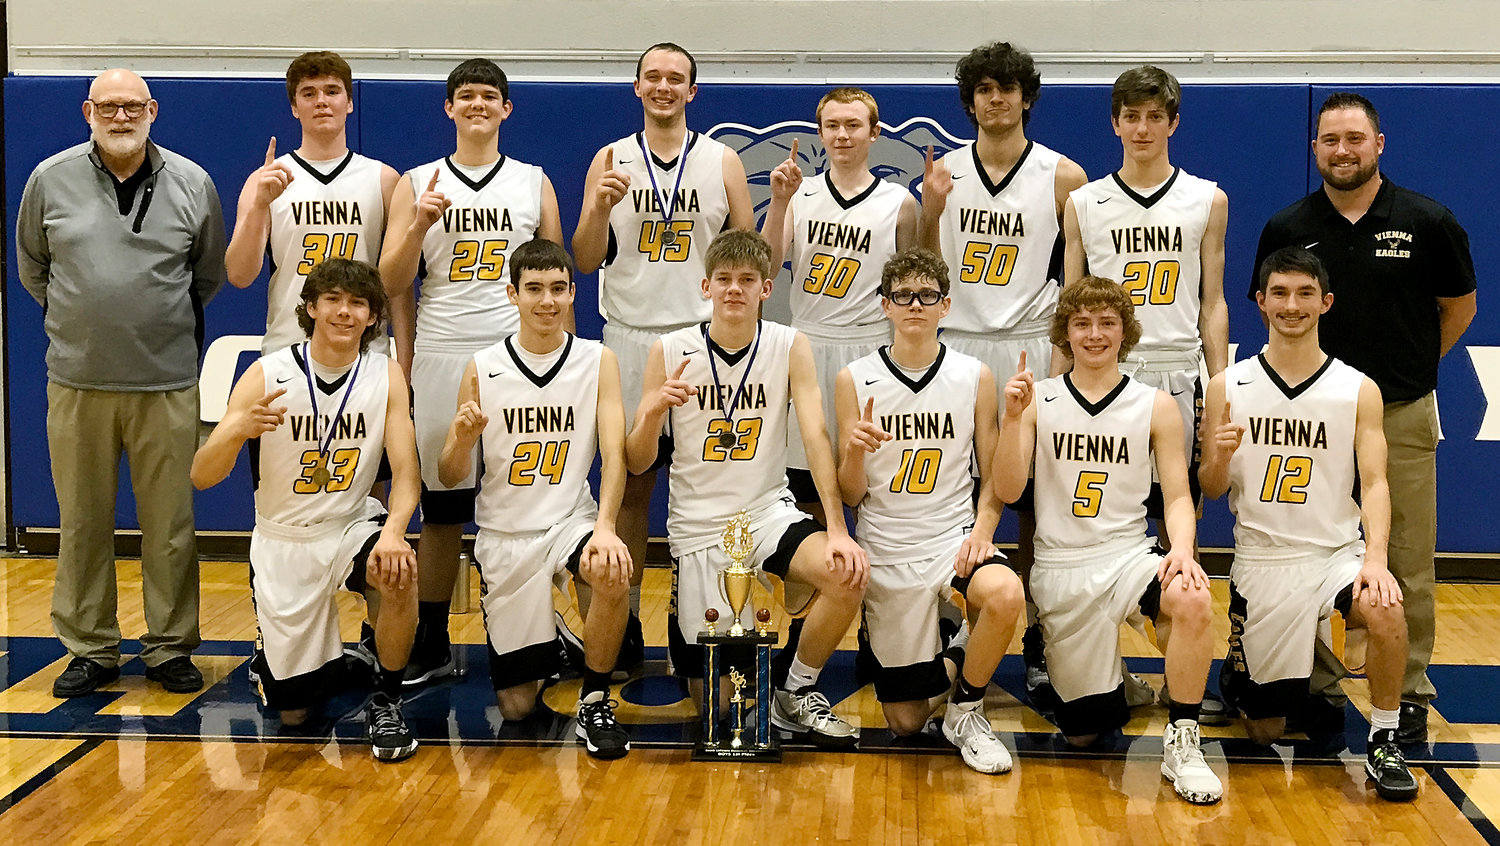 Vienna Eagle basketball team members celebrate their tournament championship Friday night at South Callaway following a 58-48 come-from-behind victory over Hermann’s Bearcats. This marked Vienna’s first tournament title since winning the Calvary Lutheran Tournament back in January of 2018. Team members (above, in front, from left) pictured with the first-place trophy include Spencer Magner, Benton Patton, Bayrd Vanscoy, Max Steffen, Lucas Magner and Tjae Schell; and in back, assistant coach Mike Shelton, Danniel Casey, Colin John, Trey Snodgrass, Camden George, Giulio Cecchinato, Cash Stricklan and head coach Chandler Harker.